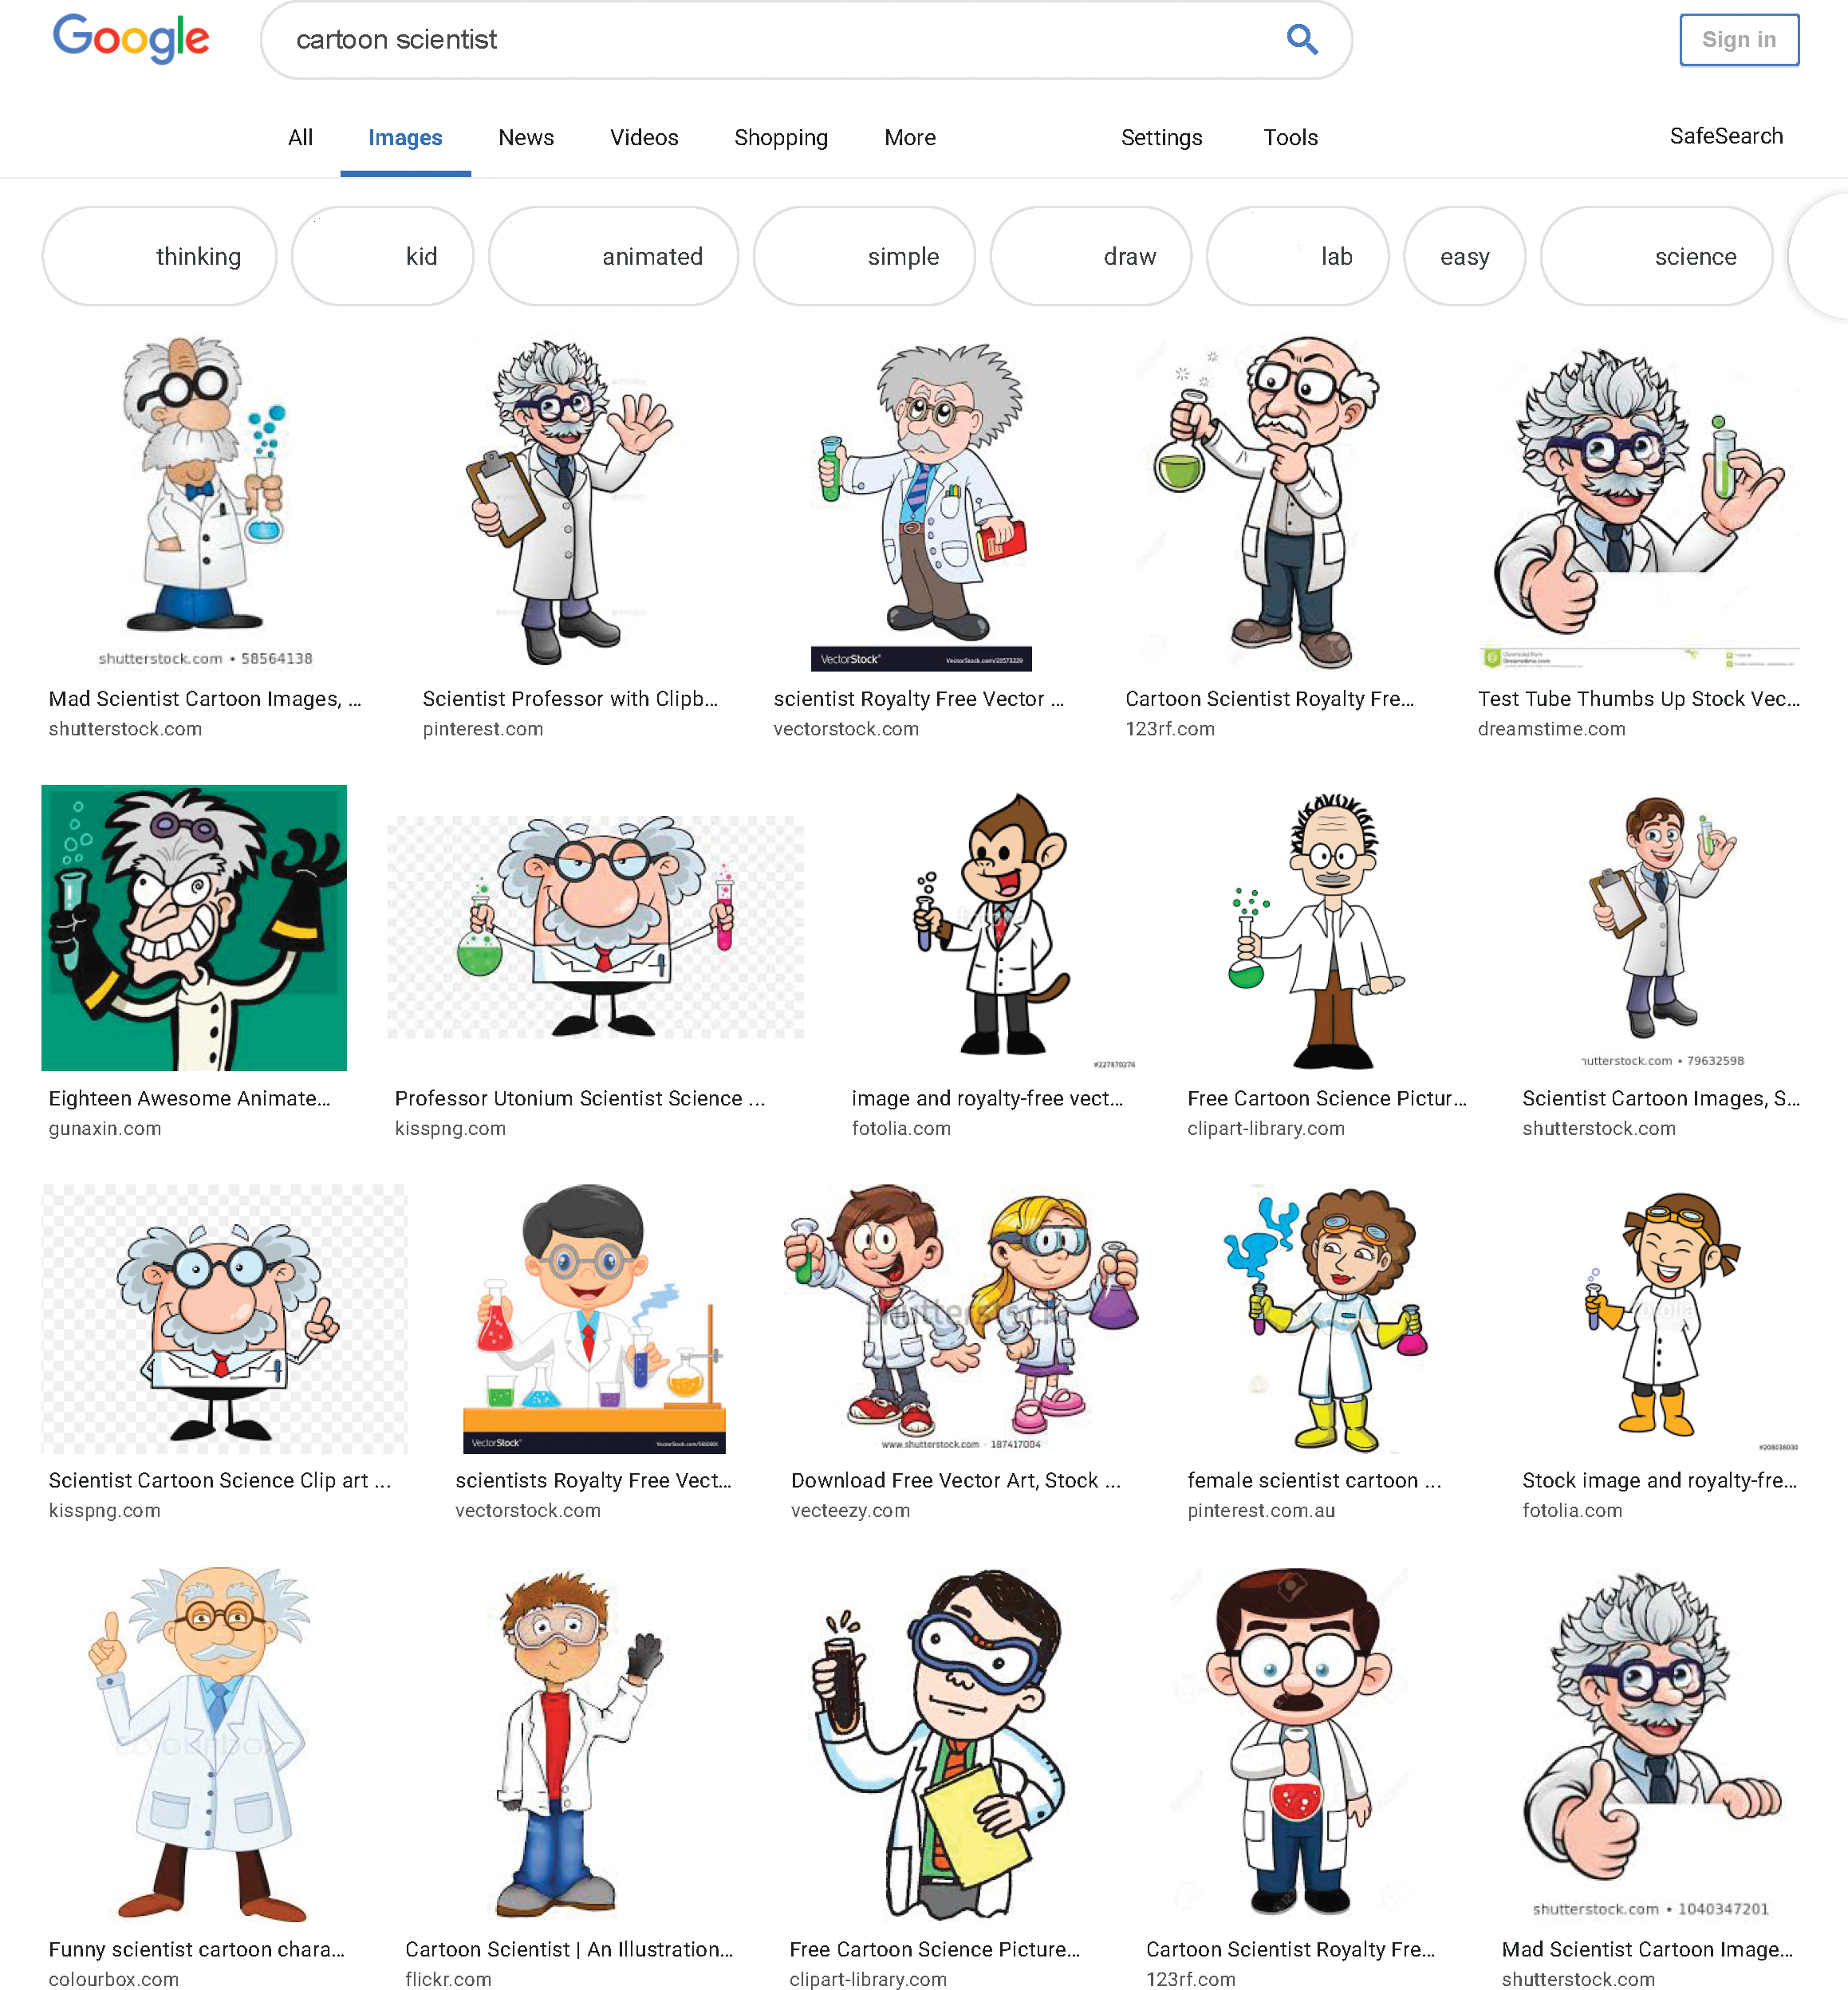 Google image search for “cartoon scientist” (screenshot from May 31, 2019)